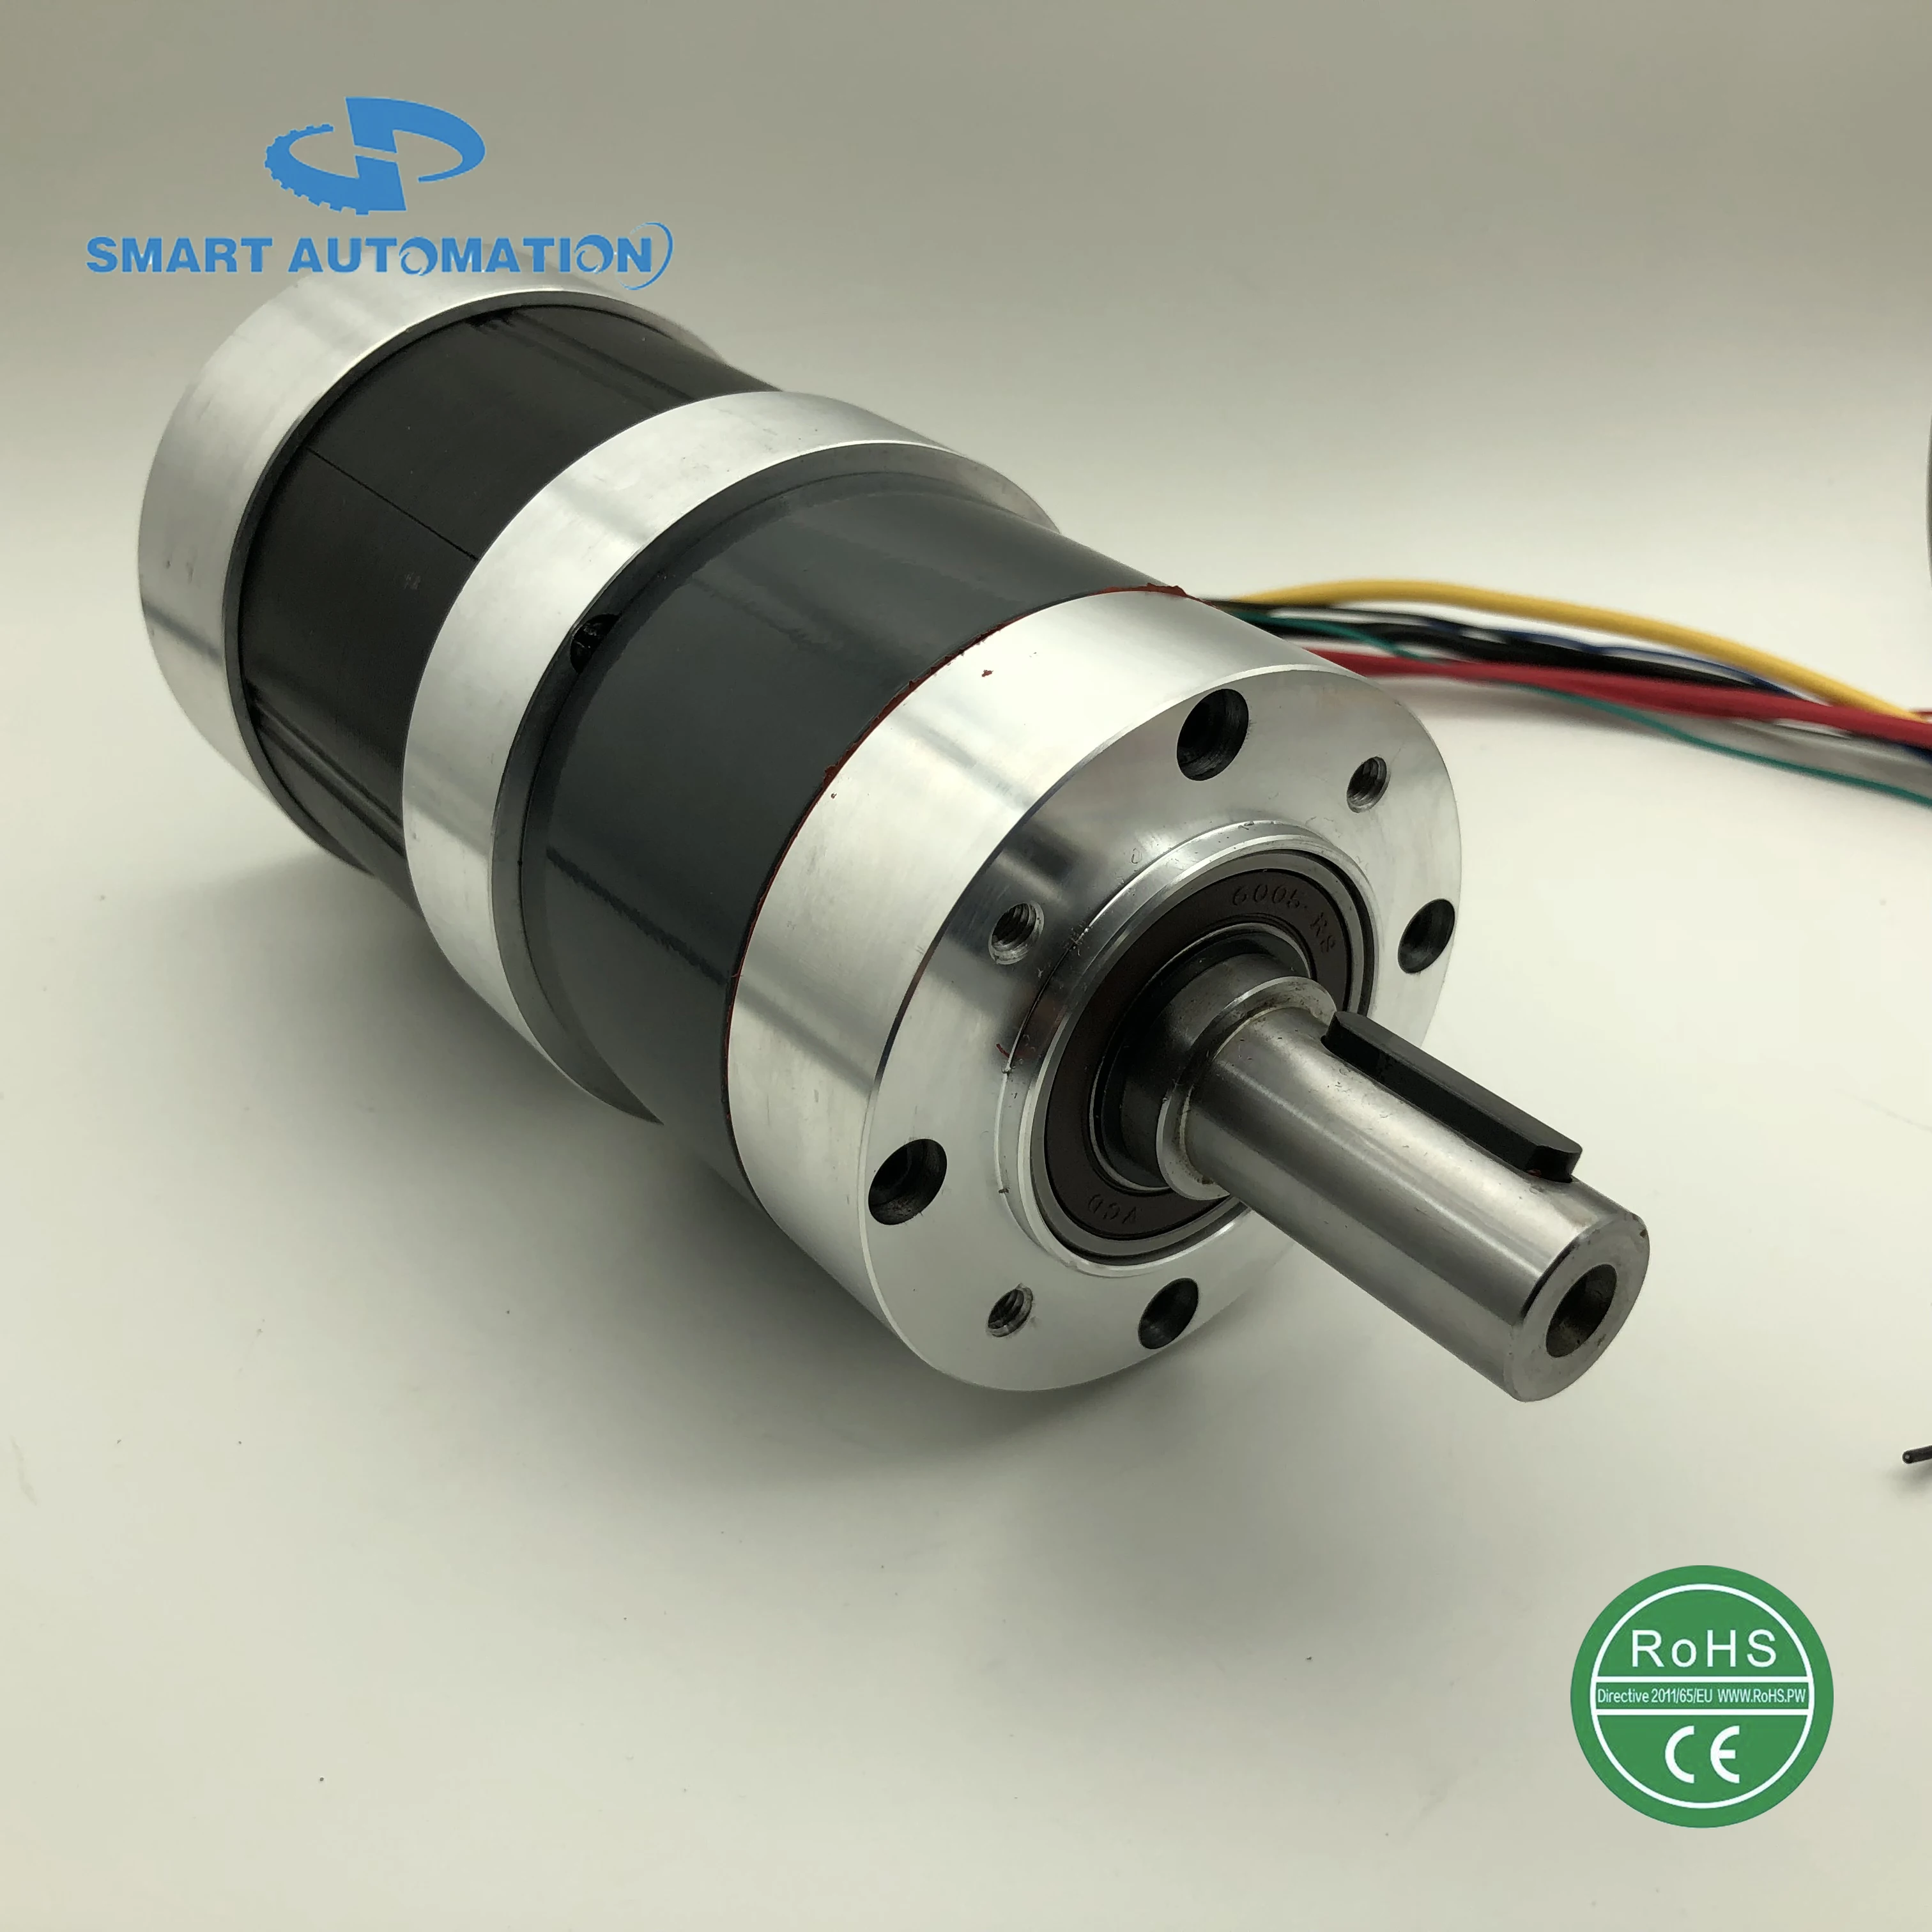 82PN.86bl Helical Gear Large Torque Low Noise Brushless Dc Gear Motor, Rated Torque Upto 120Nm